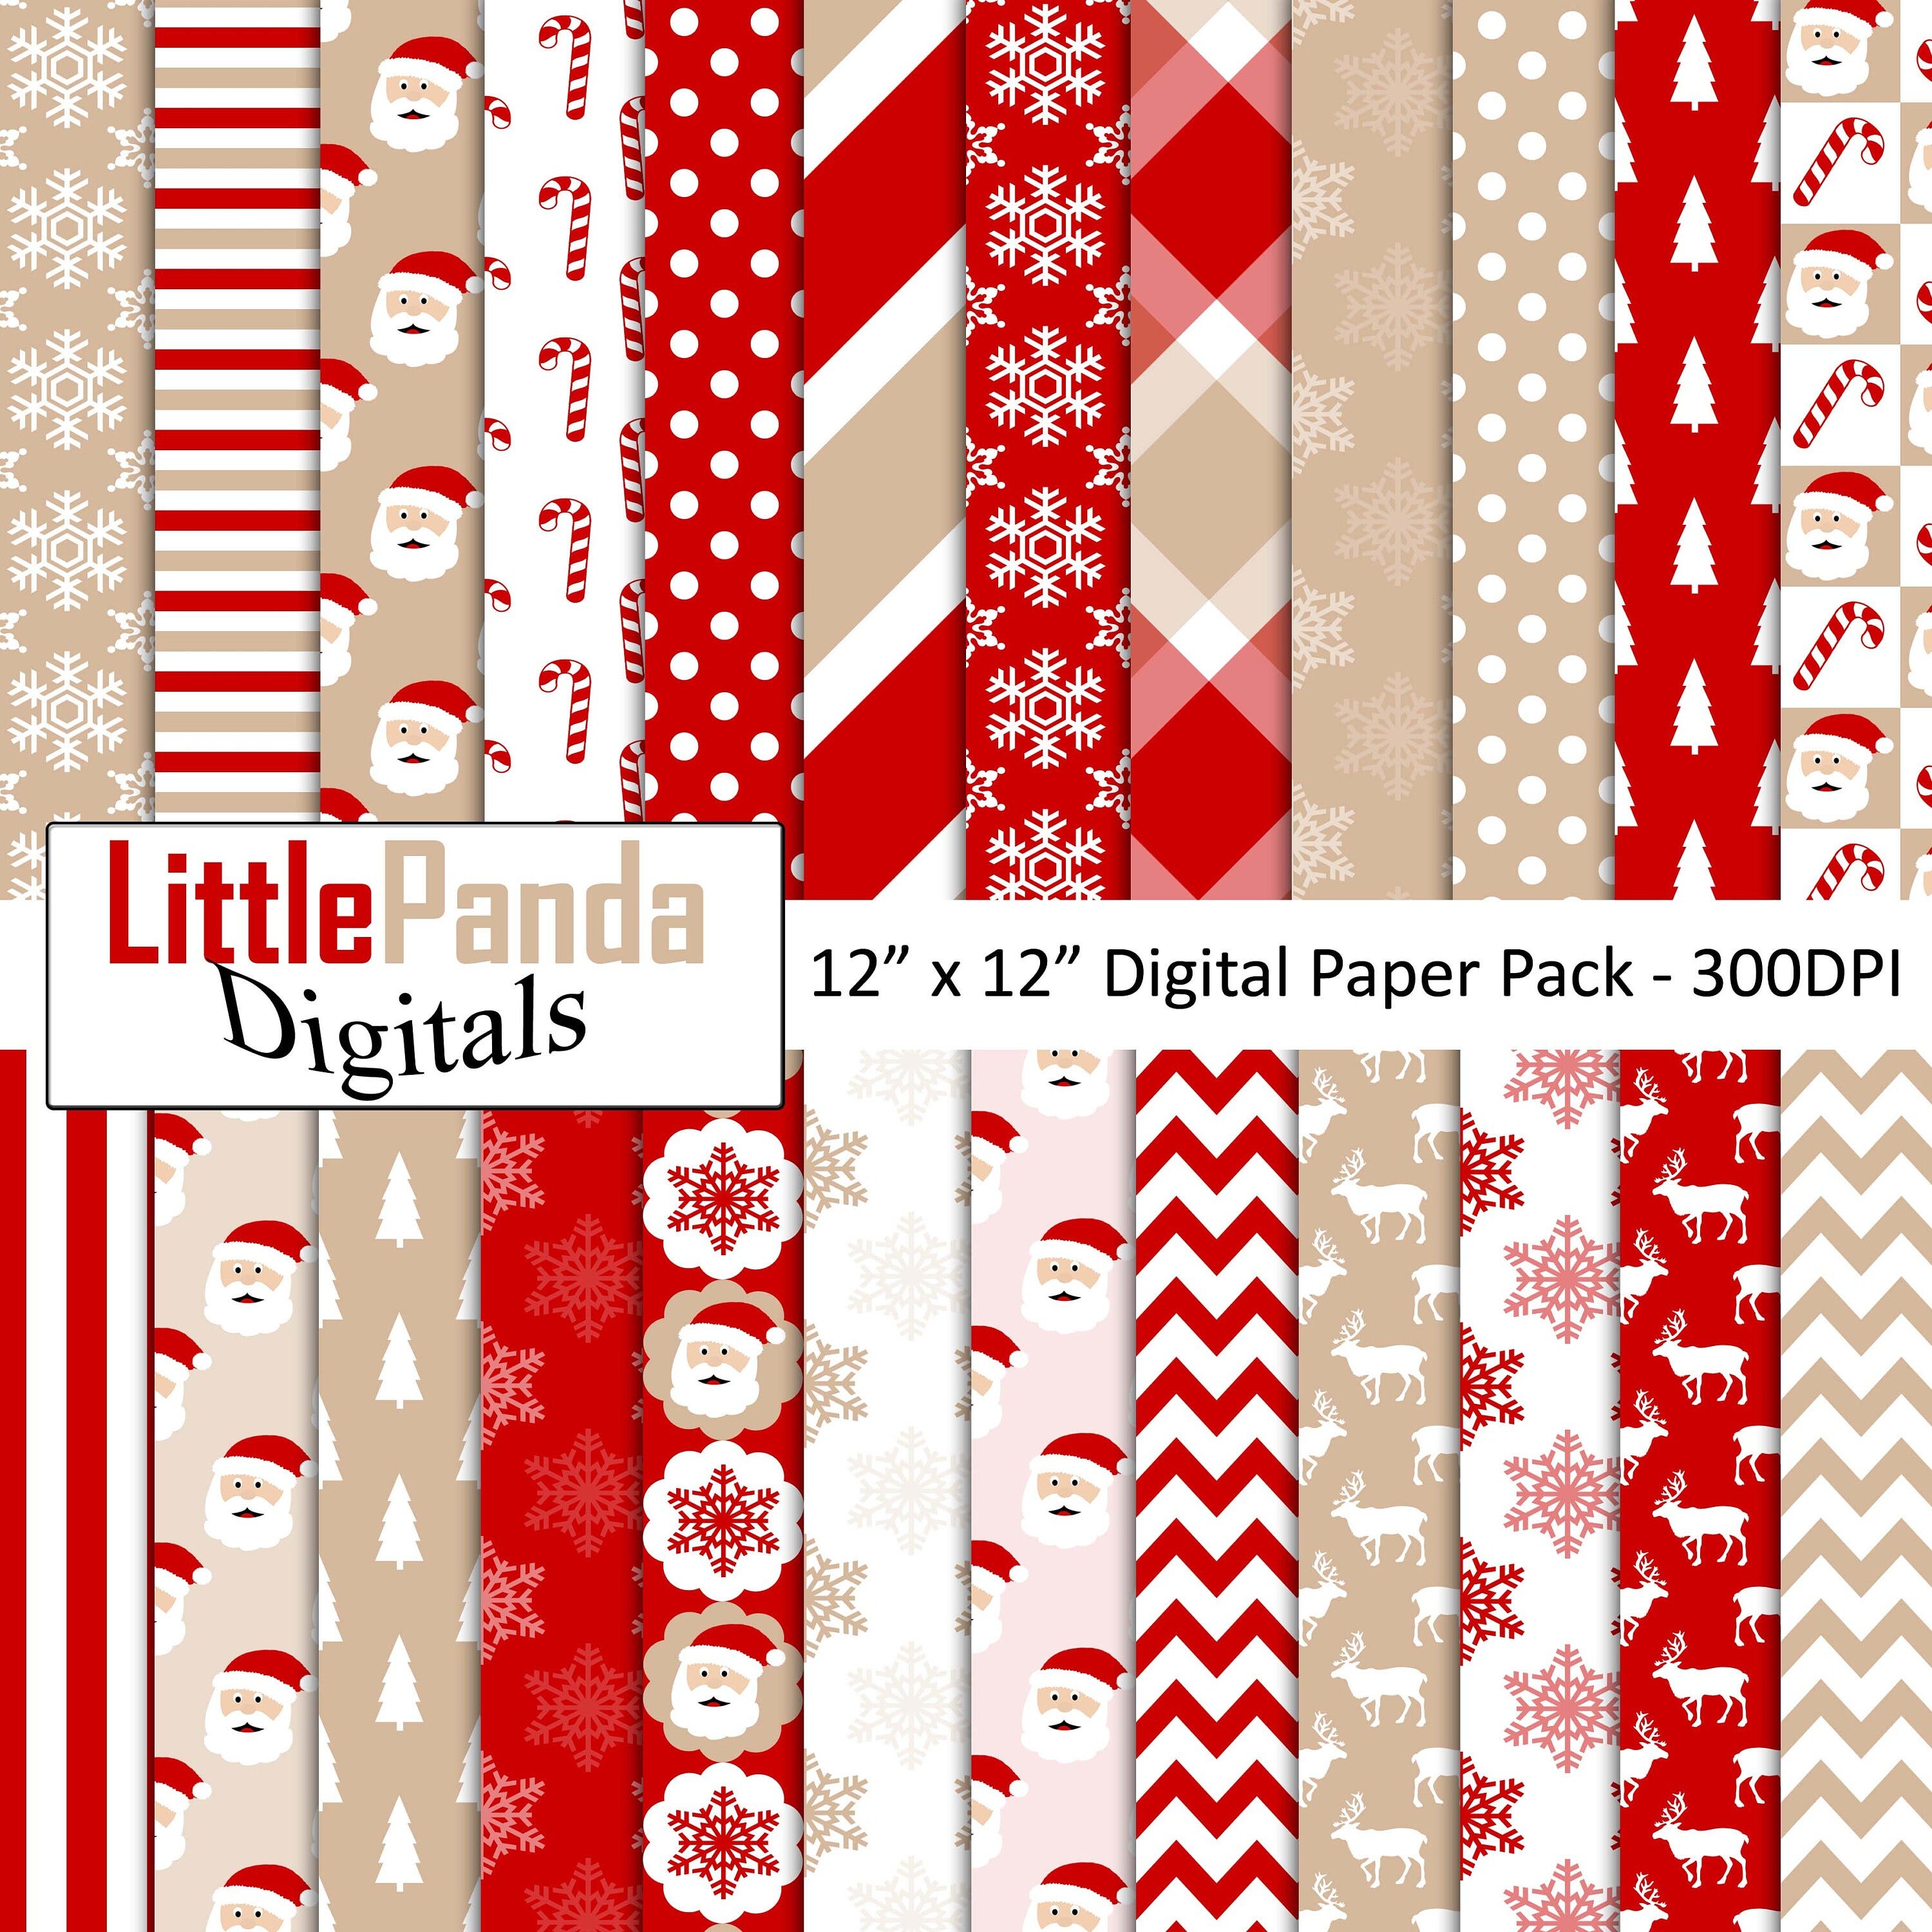 Santa digital paper, snowflake, plaid, winter, candy cane, christmas, traditional, holiday backgrounds,scrapbook papers - D496